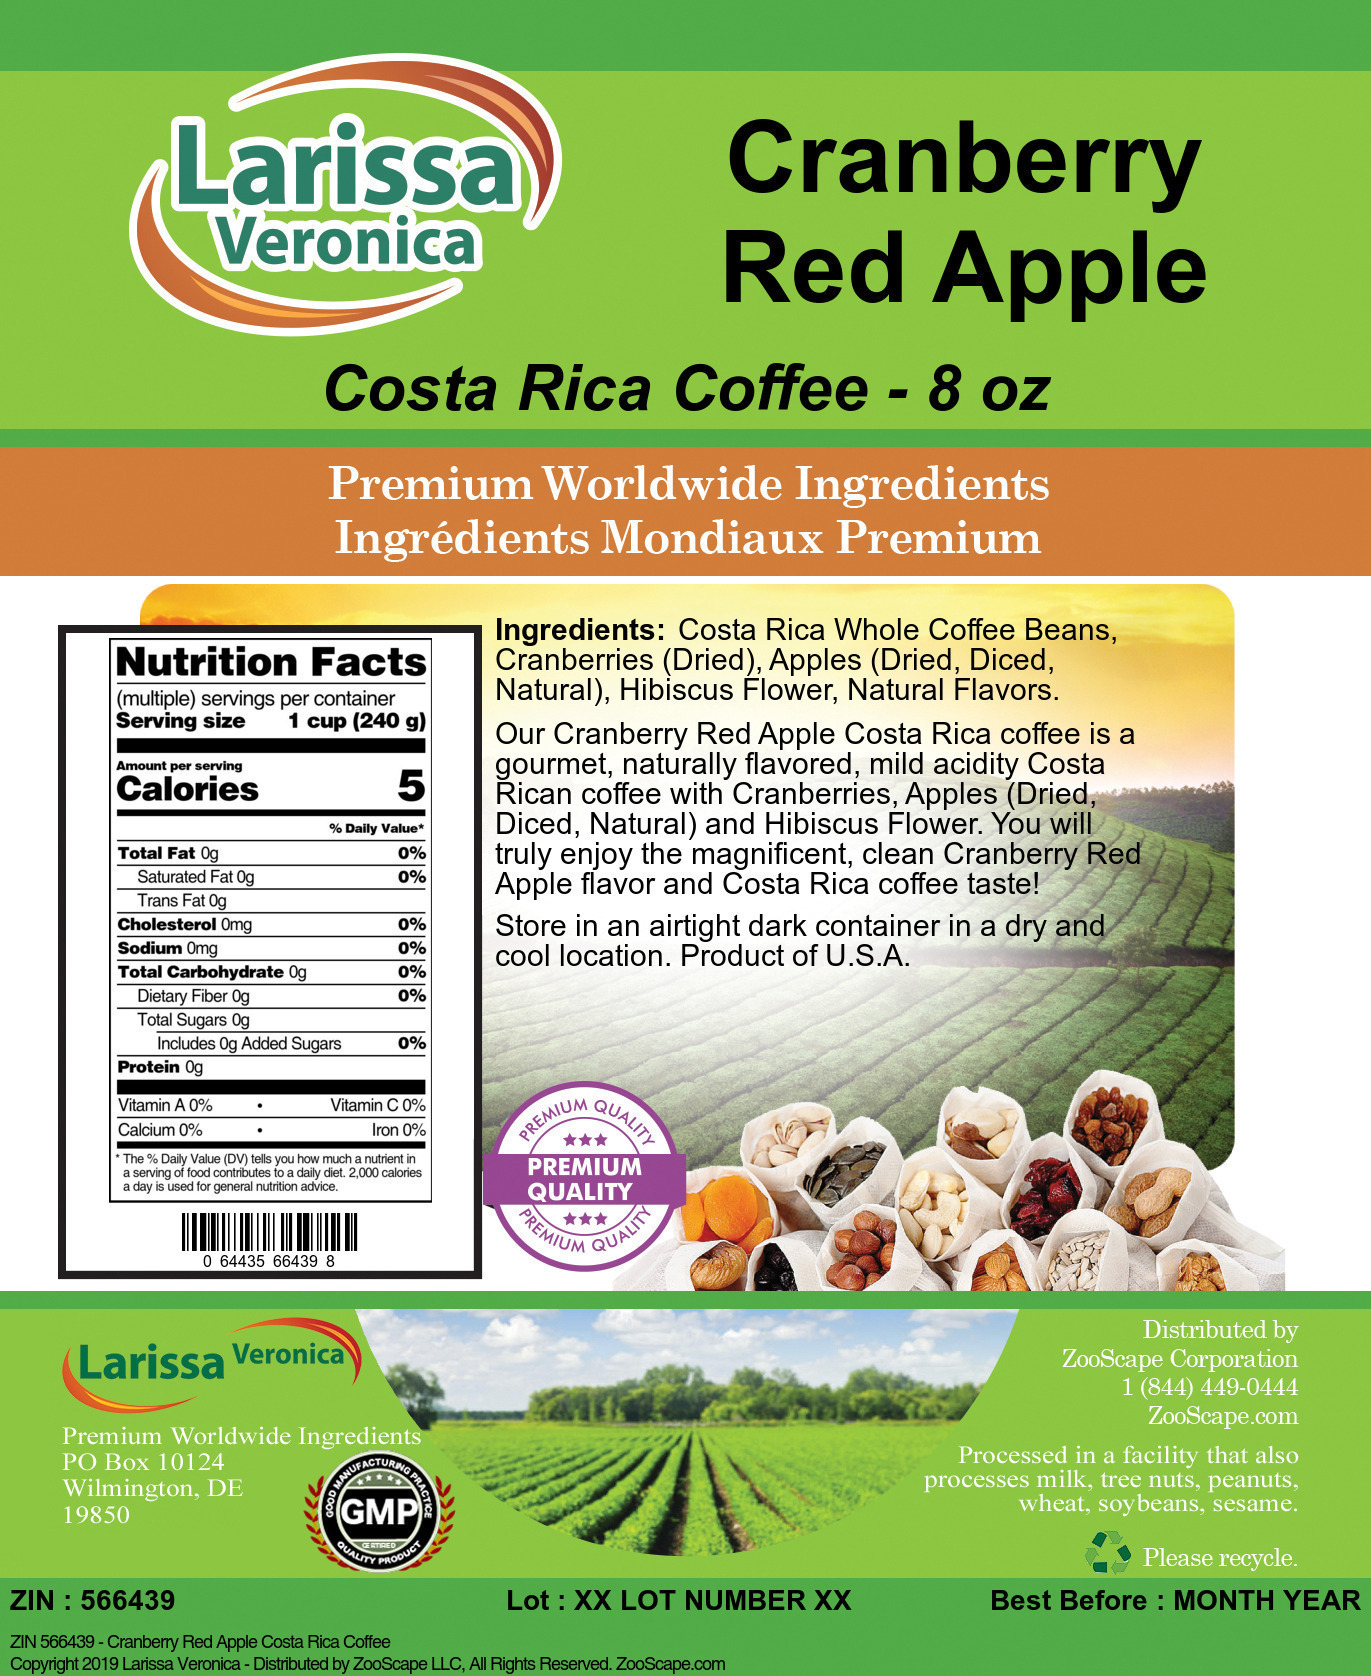 Cranberry Red Apple Costa Rica Coffee - Label